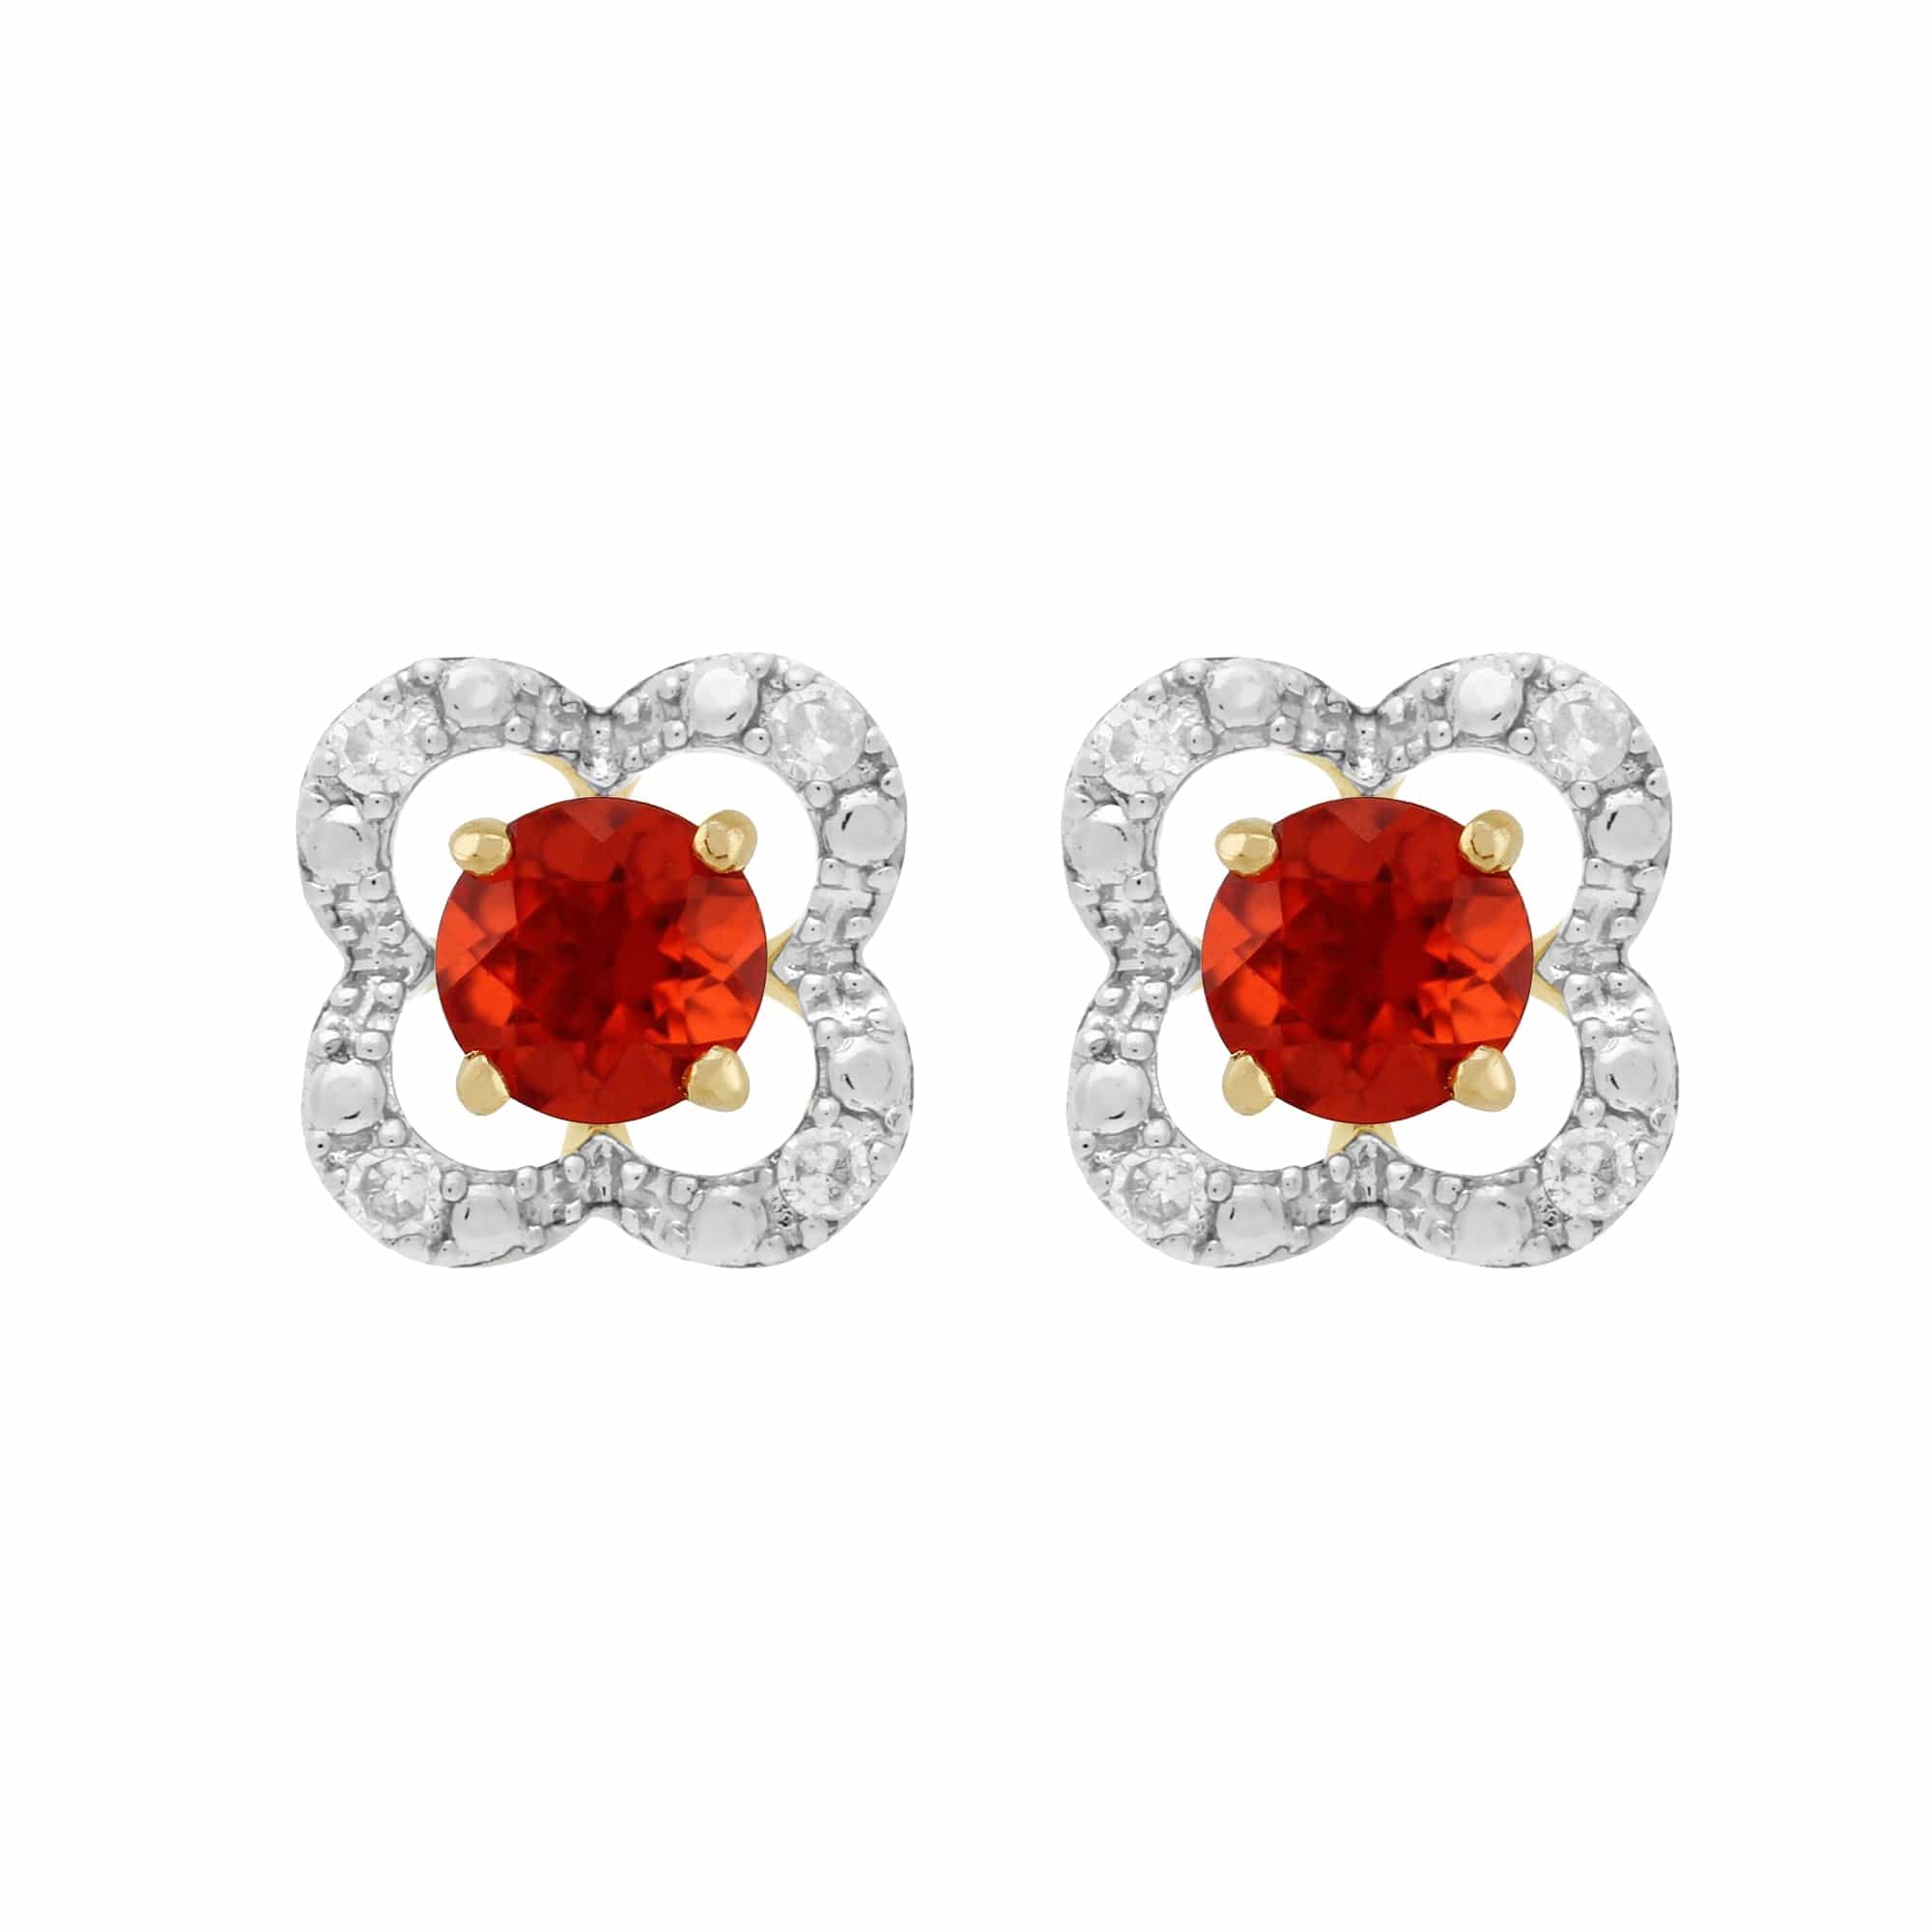 11561-191E0375019 Classic Fire Opal Stud Earrings with Detachable Diamond Floral Ear Jacket in 9ct Gold 1